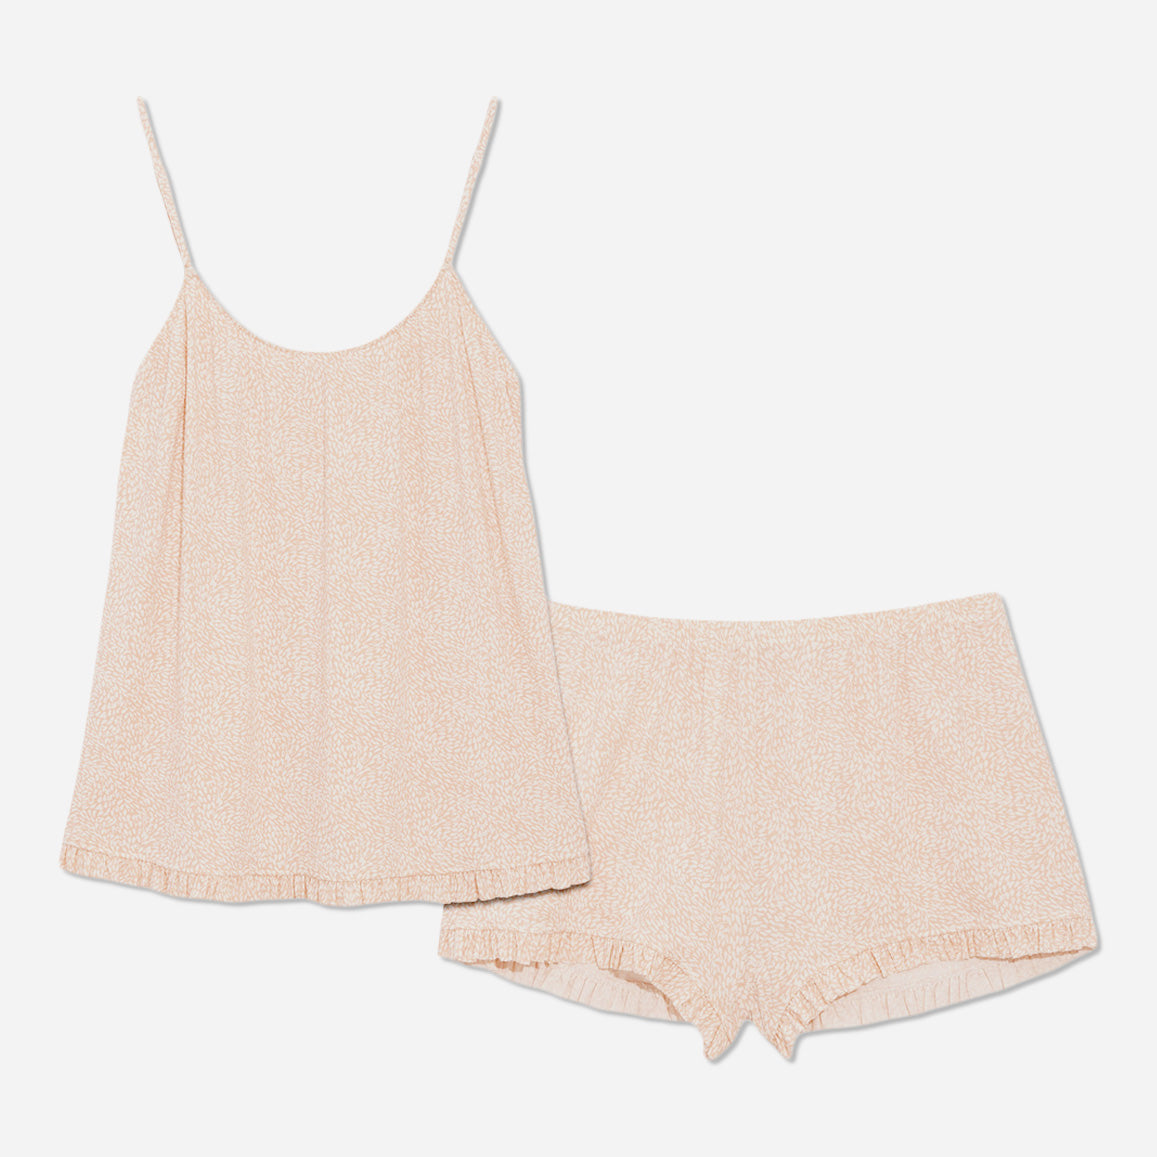 The cami top features delicate adjustable straps and a flattering neckline that accentuates your natural beauty. The accompanying shorts are designed with both style and comfort in mind. The relaxed fit allows for effortless movement, while the elastic waistband ensures a secure and personalized fit. 